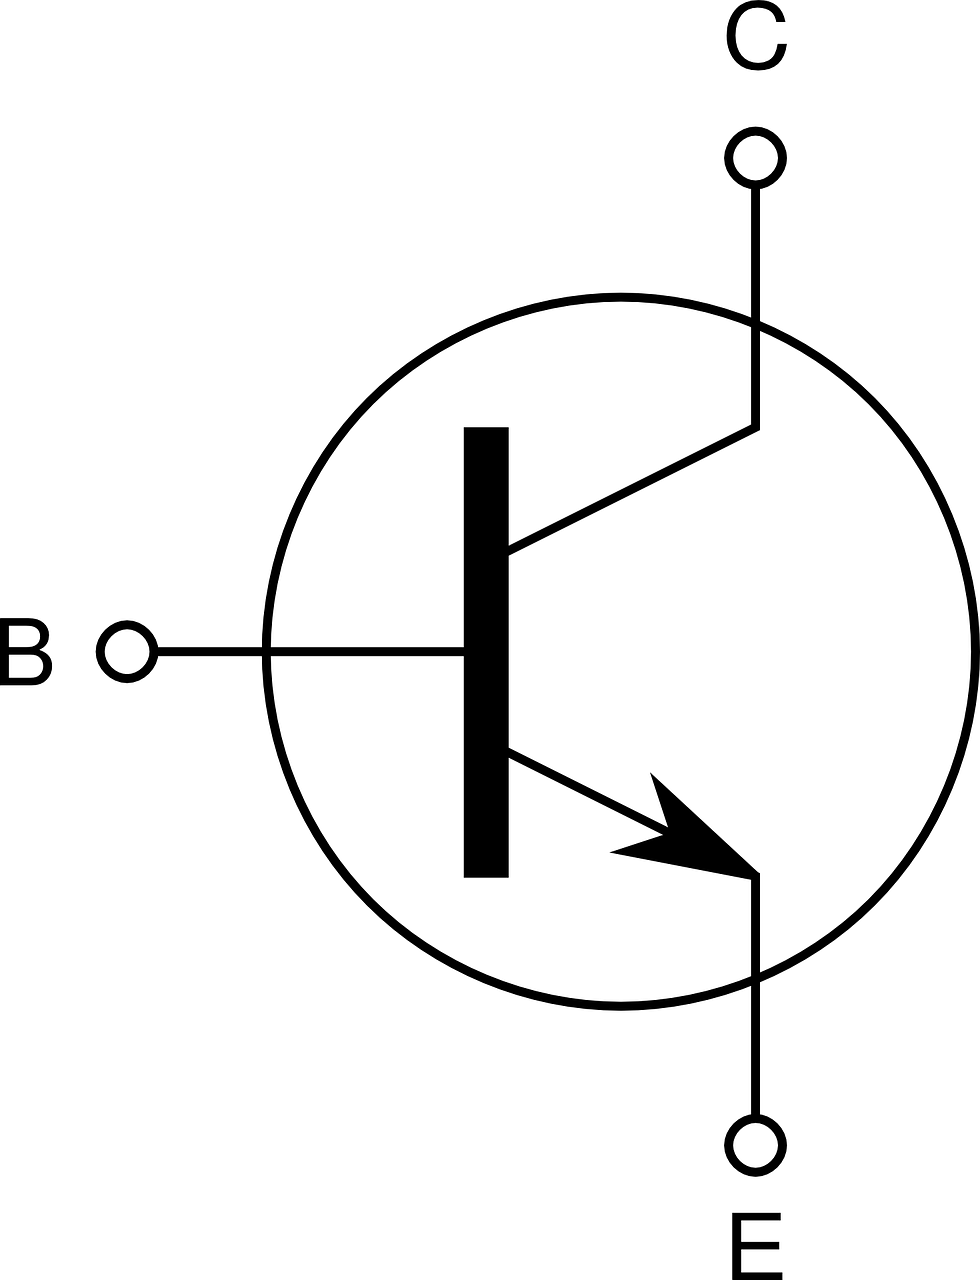 A Black And White Circle With Arrows And A White Circle With Dots